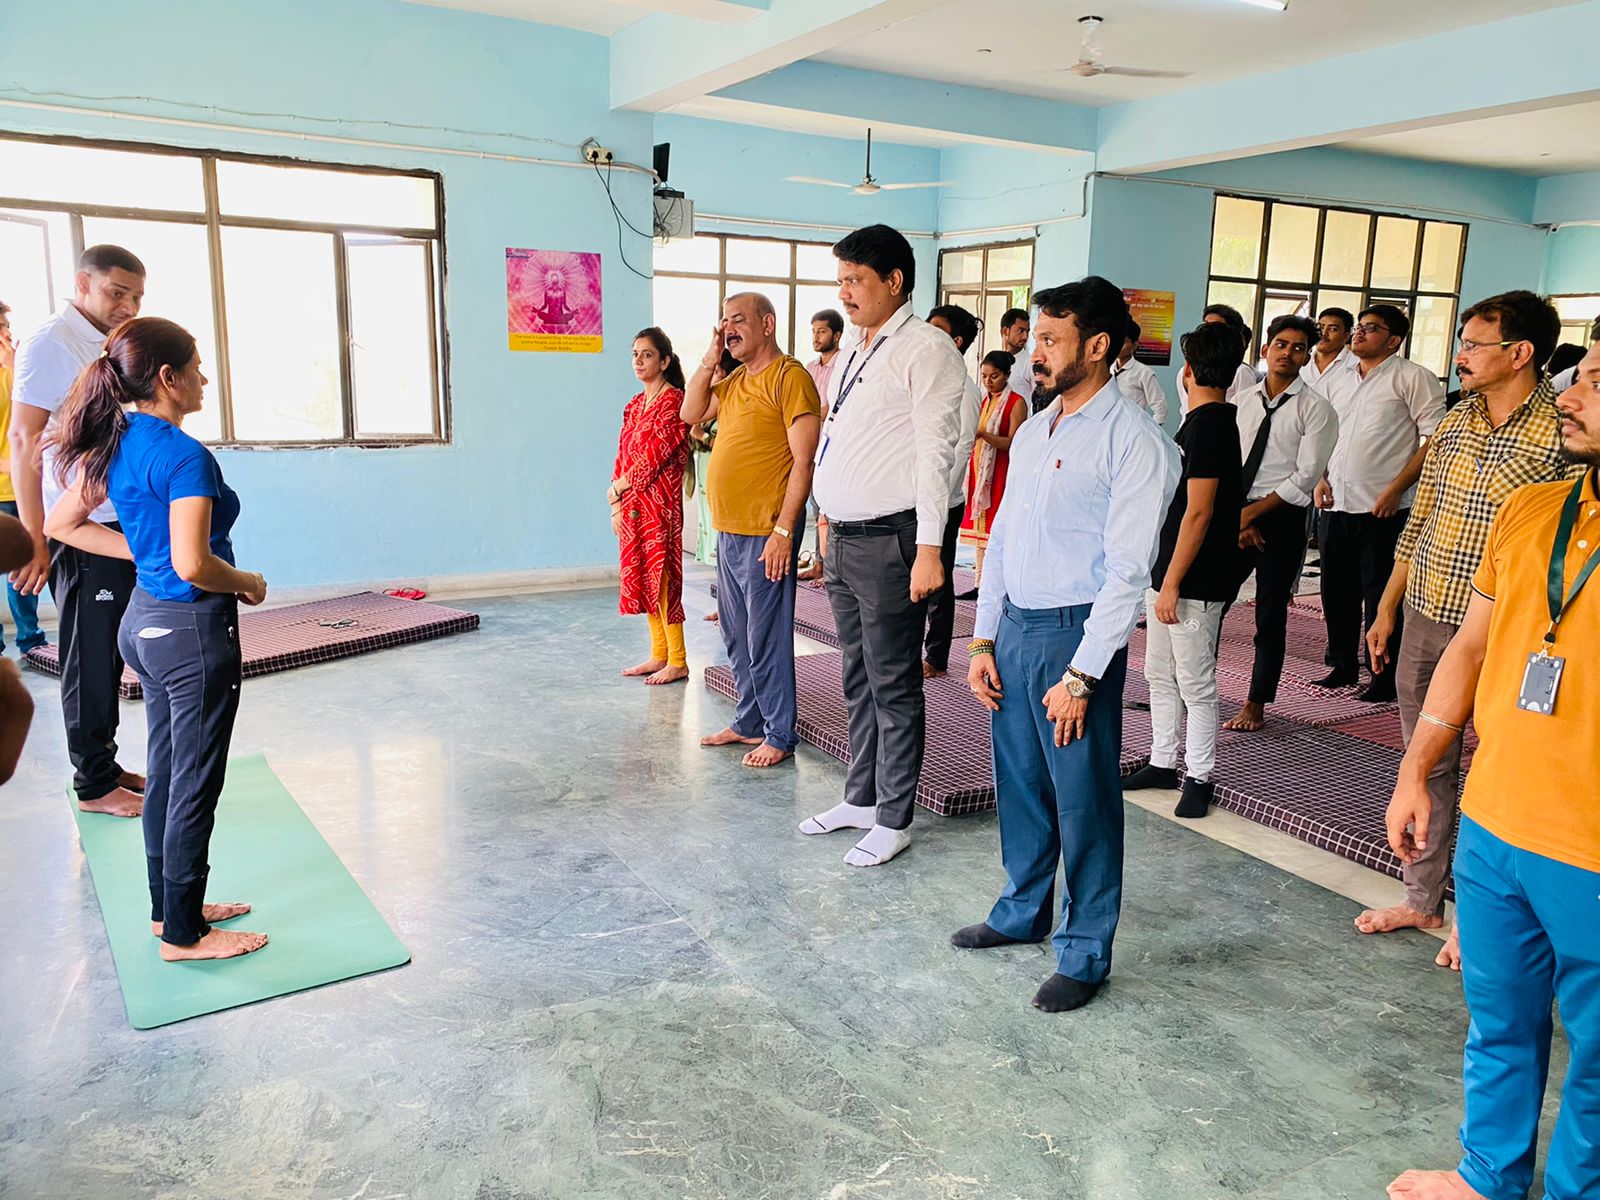 "International Yoga Day 2022" organized by United College of Education Greater Noida